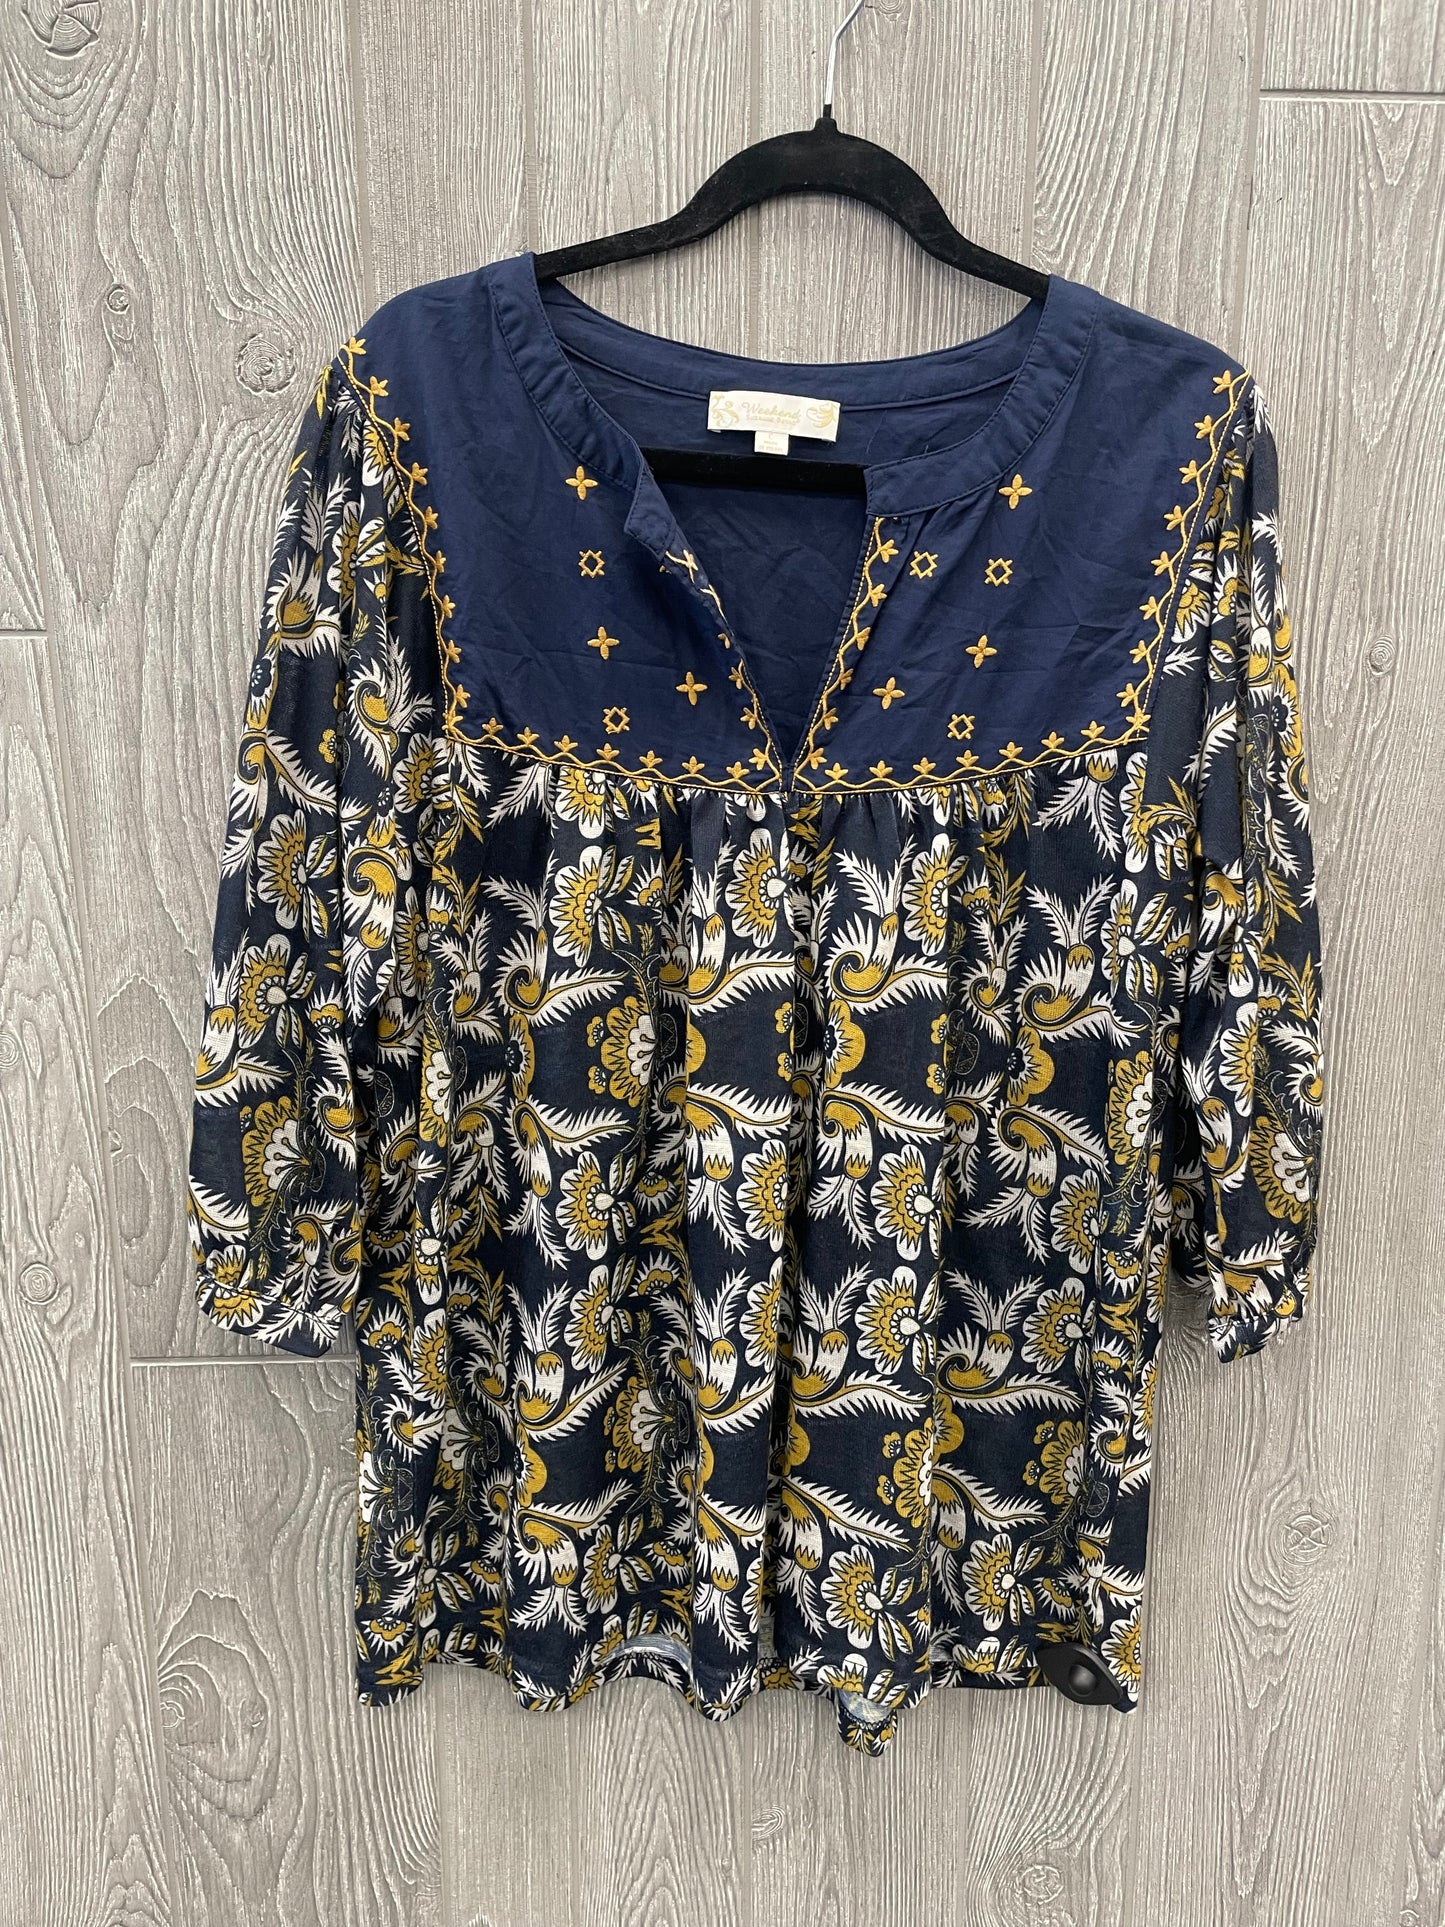 Blue Top 3/4 Sleeve Suzanne Betro, Size L